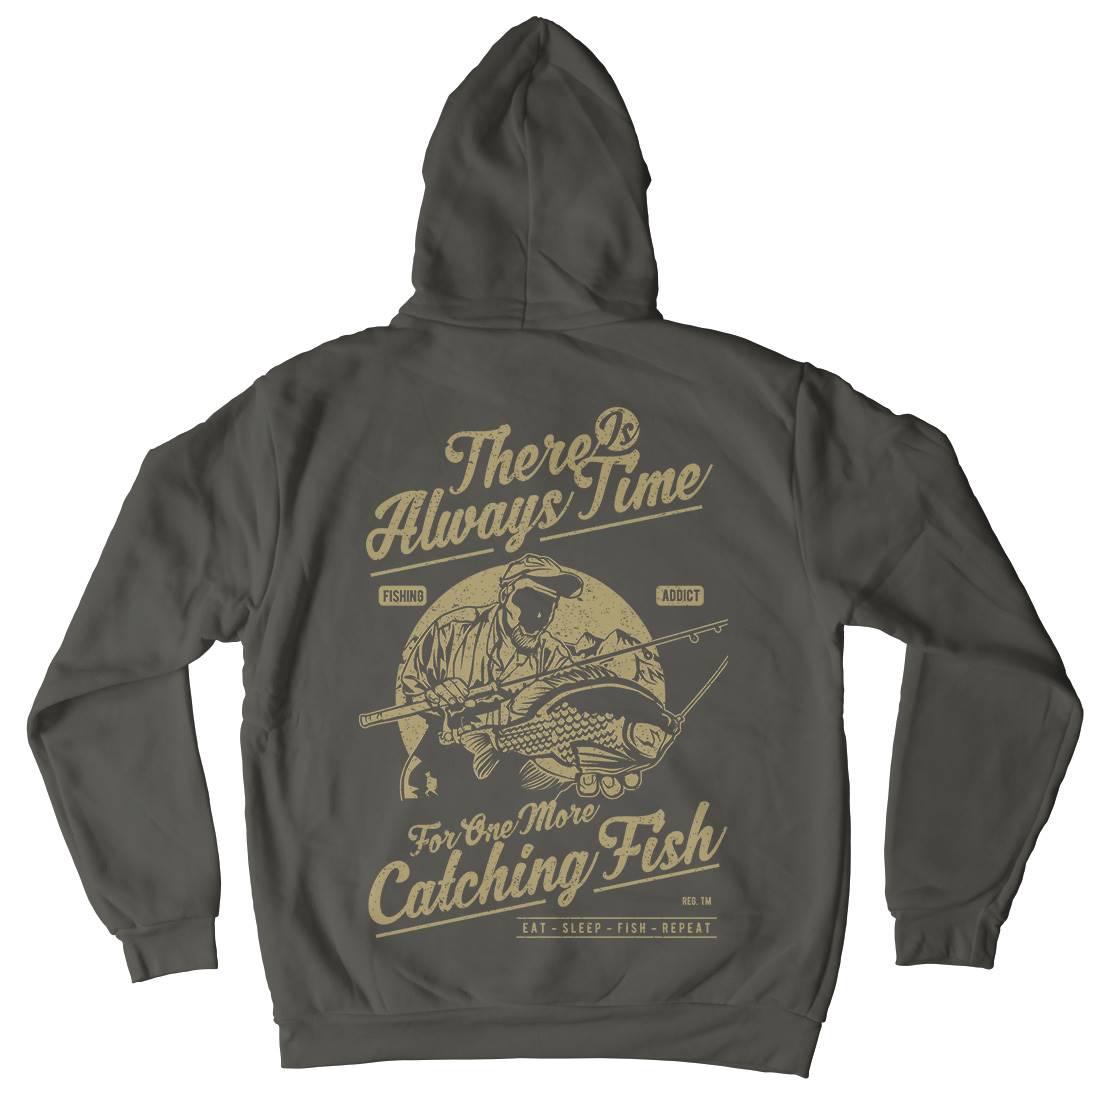 One More Catching Kids Crew Neck Hoodie Fishing A731